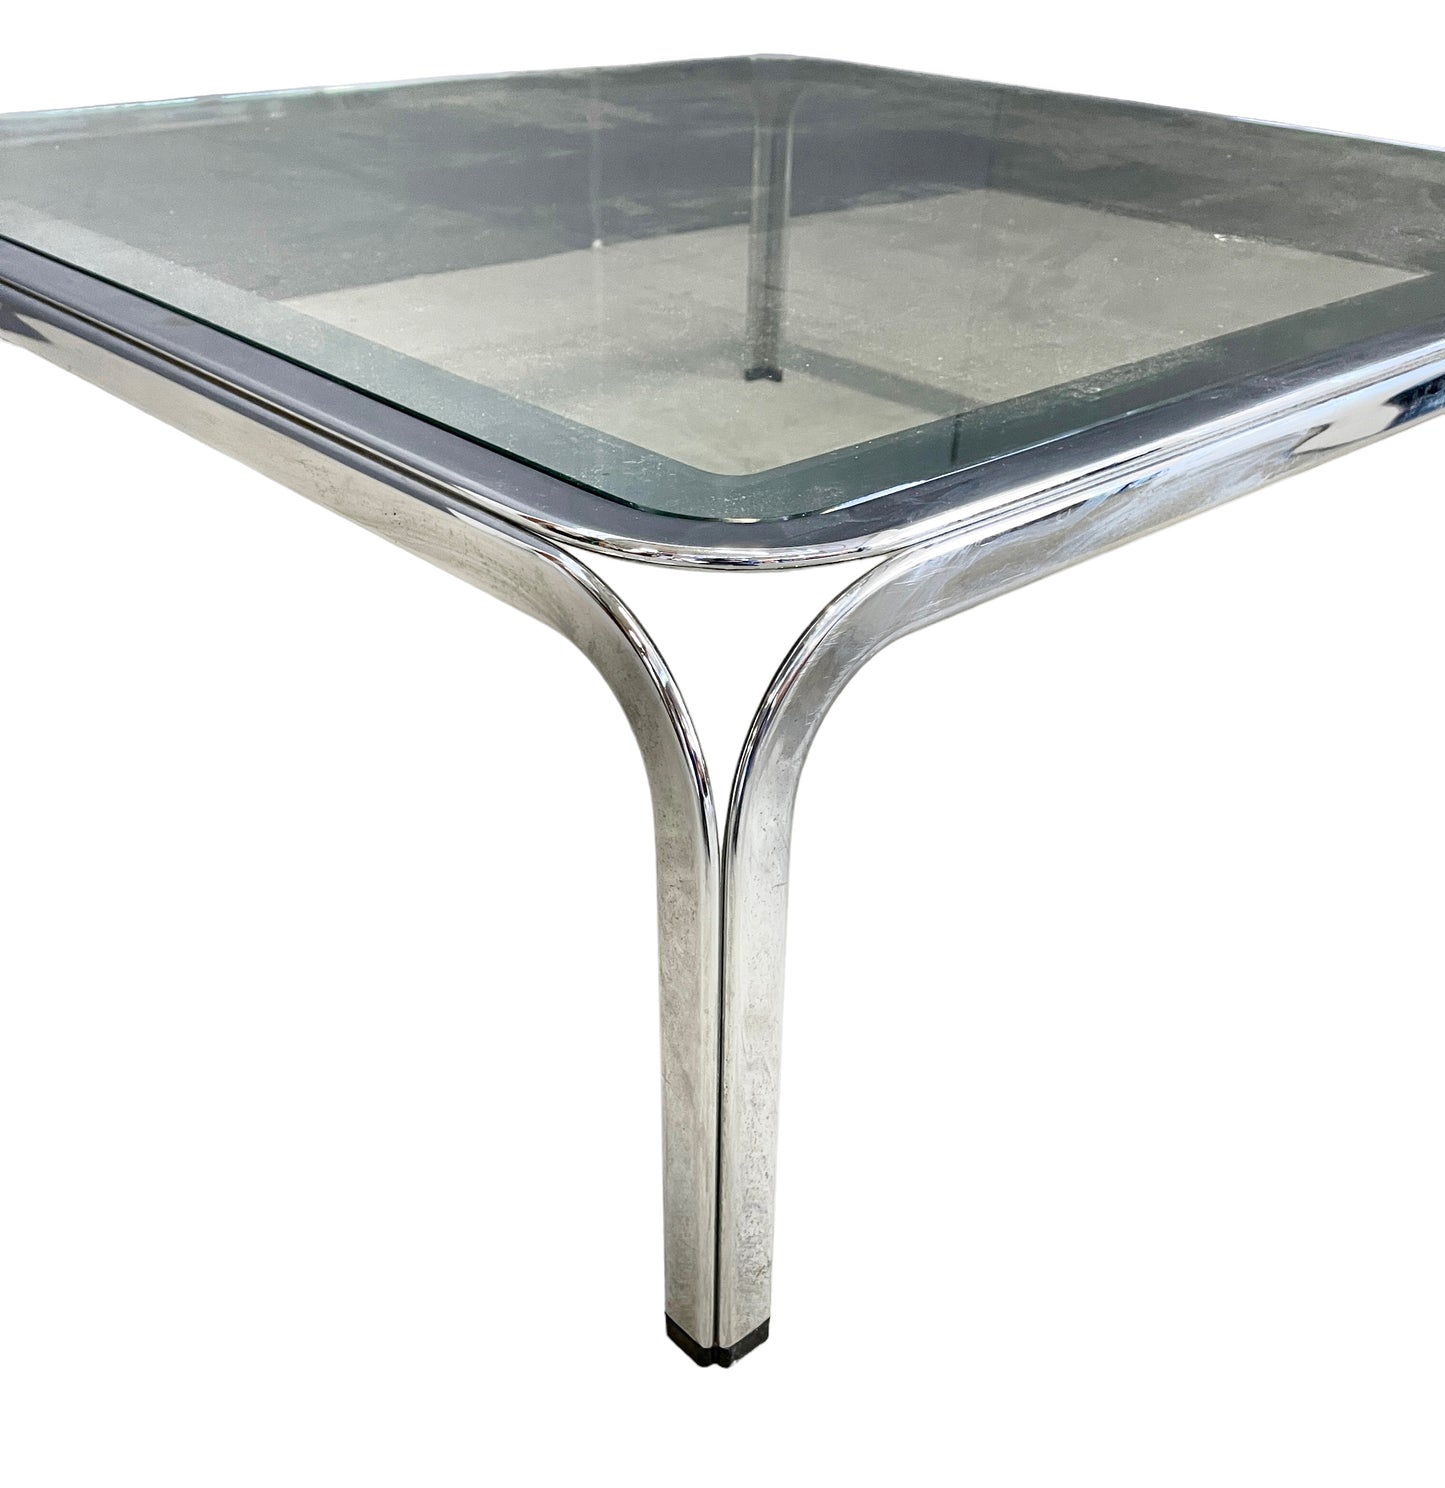 Chrome-plated metal and glass top Coffee table, 1970s